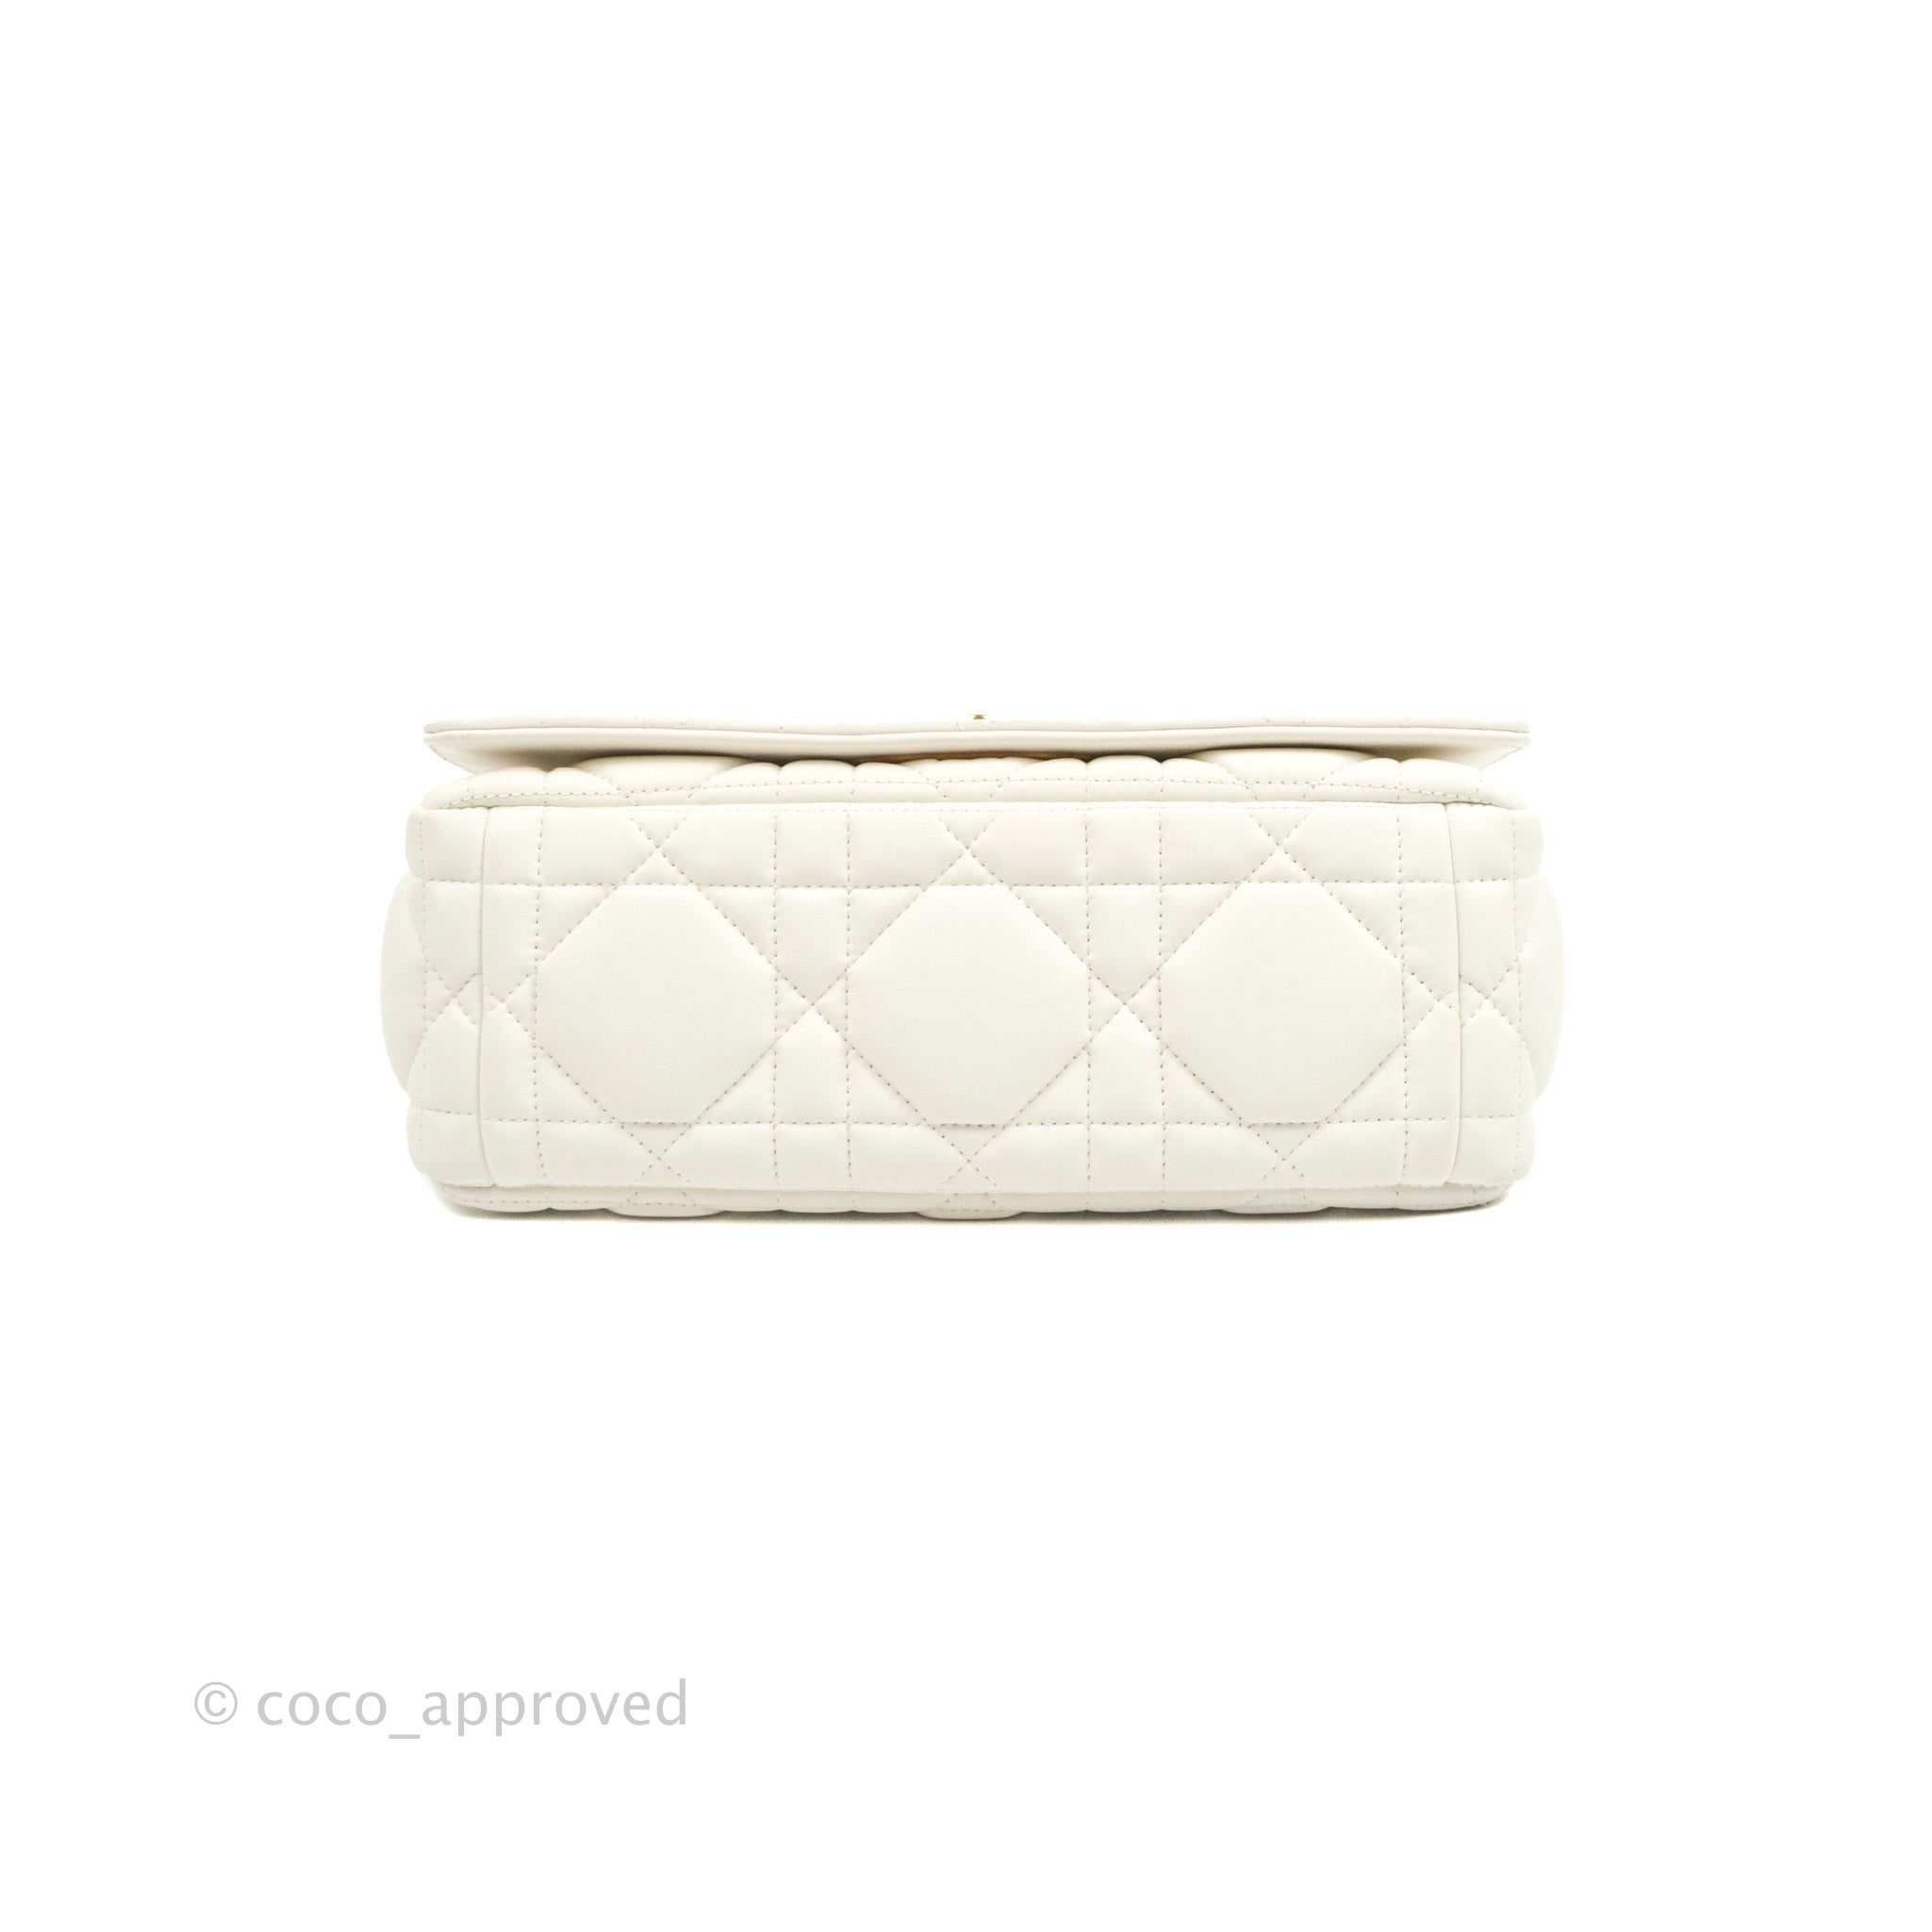 Small Dior Caro Bag Latte Quilted Macrocannage Calfskin